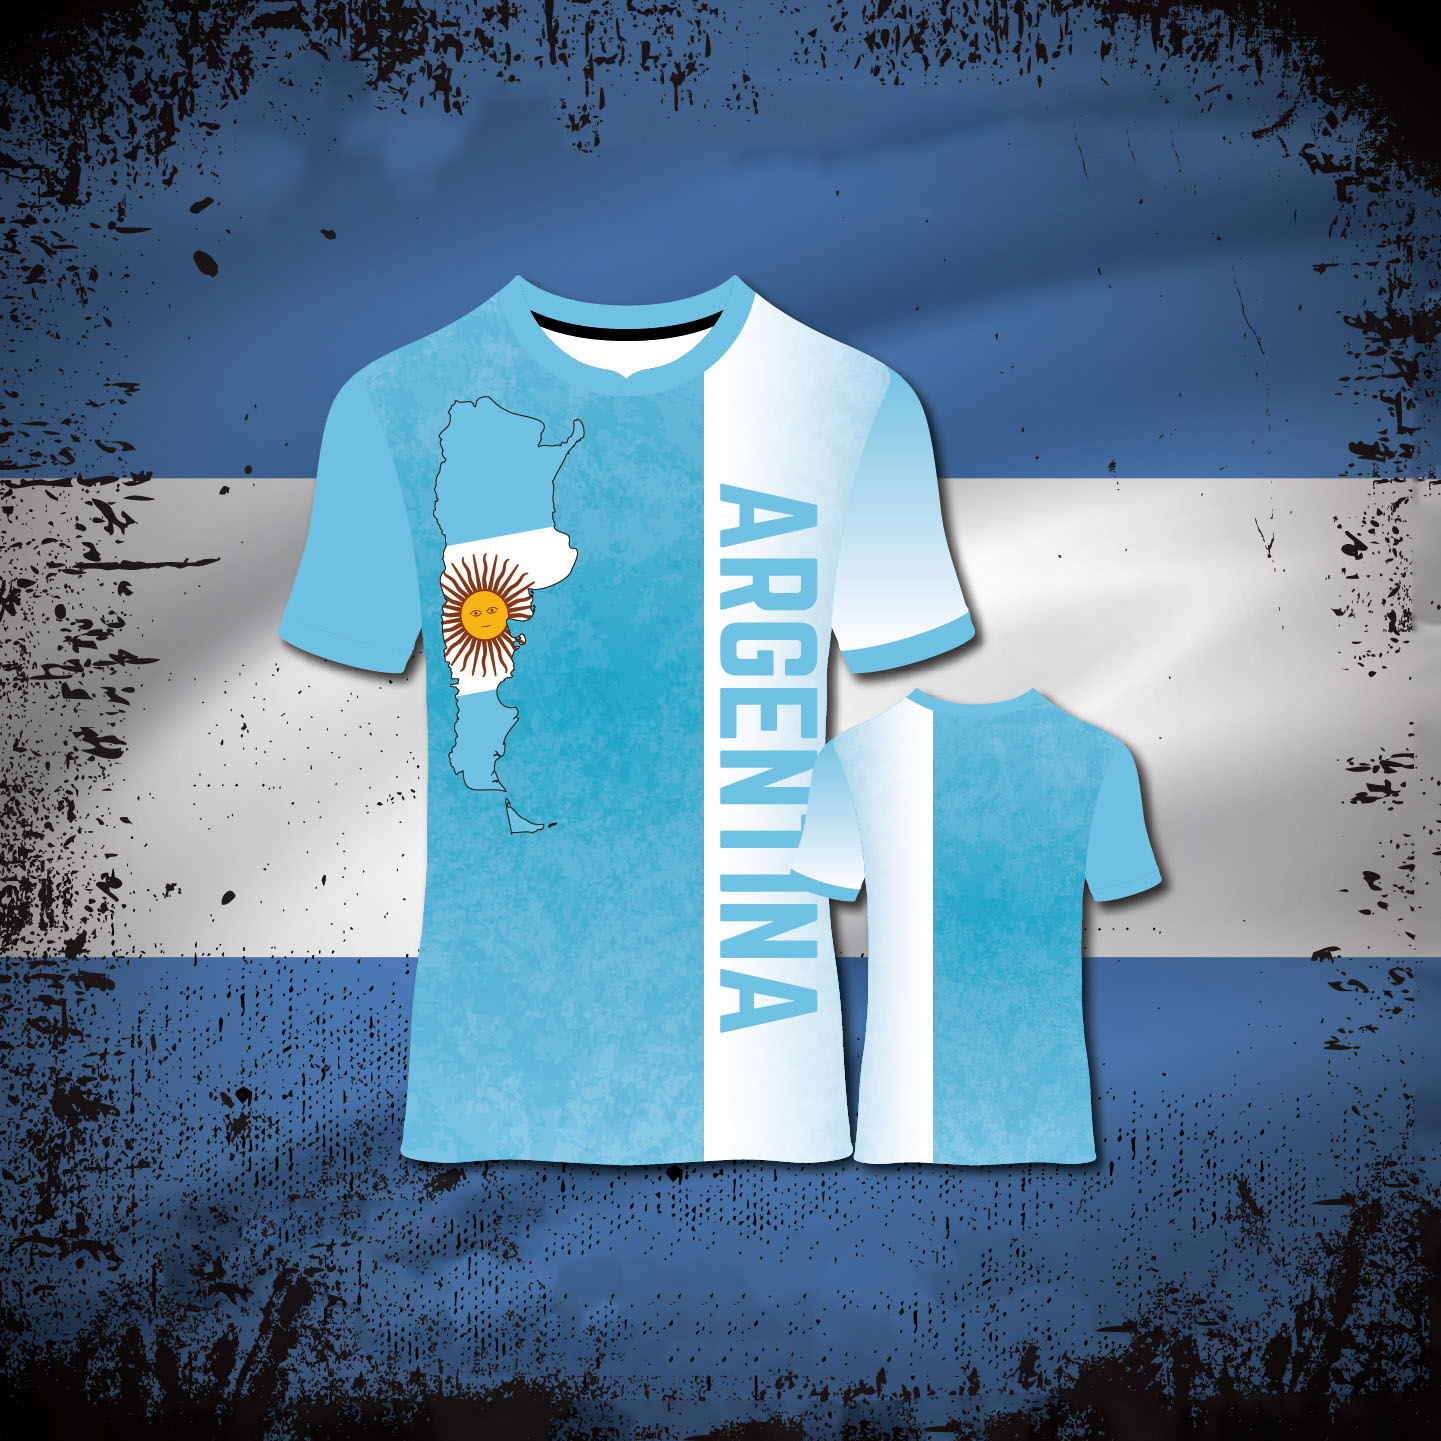 Prints of argentina on t-shorts.